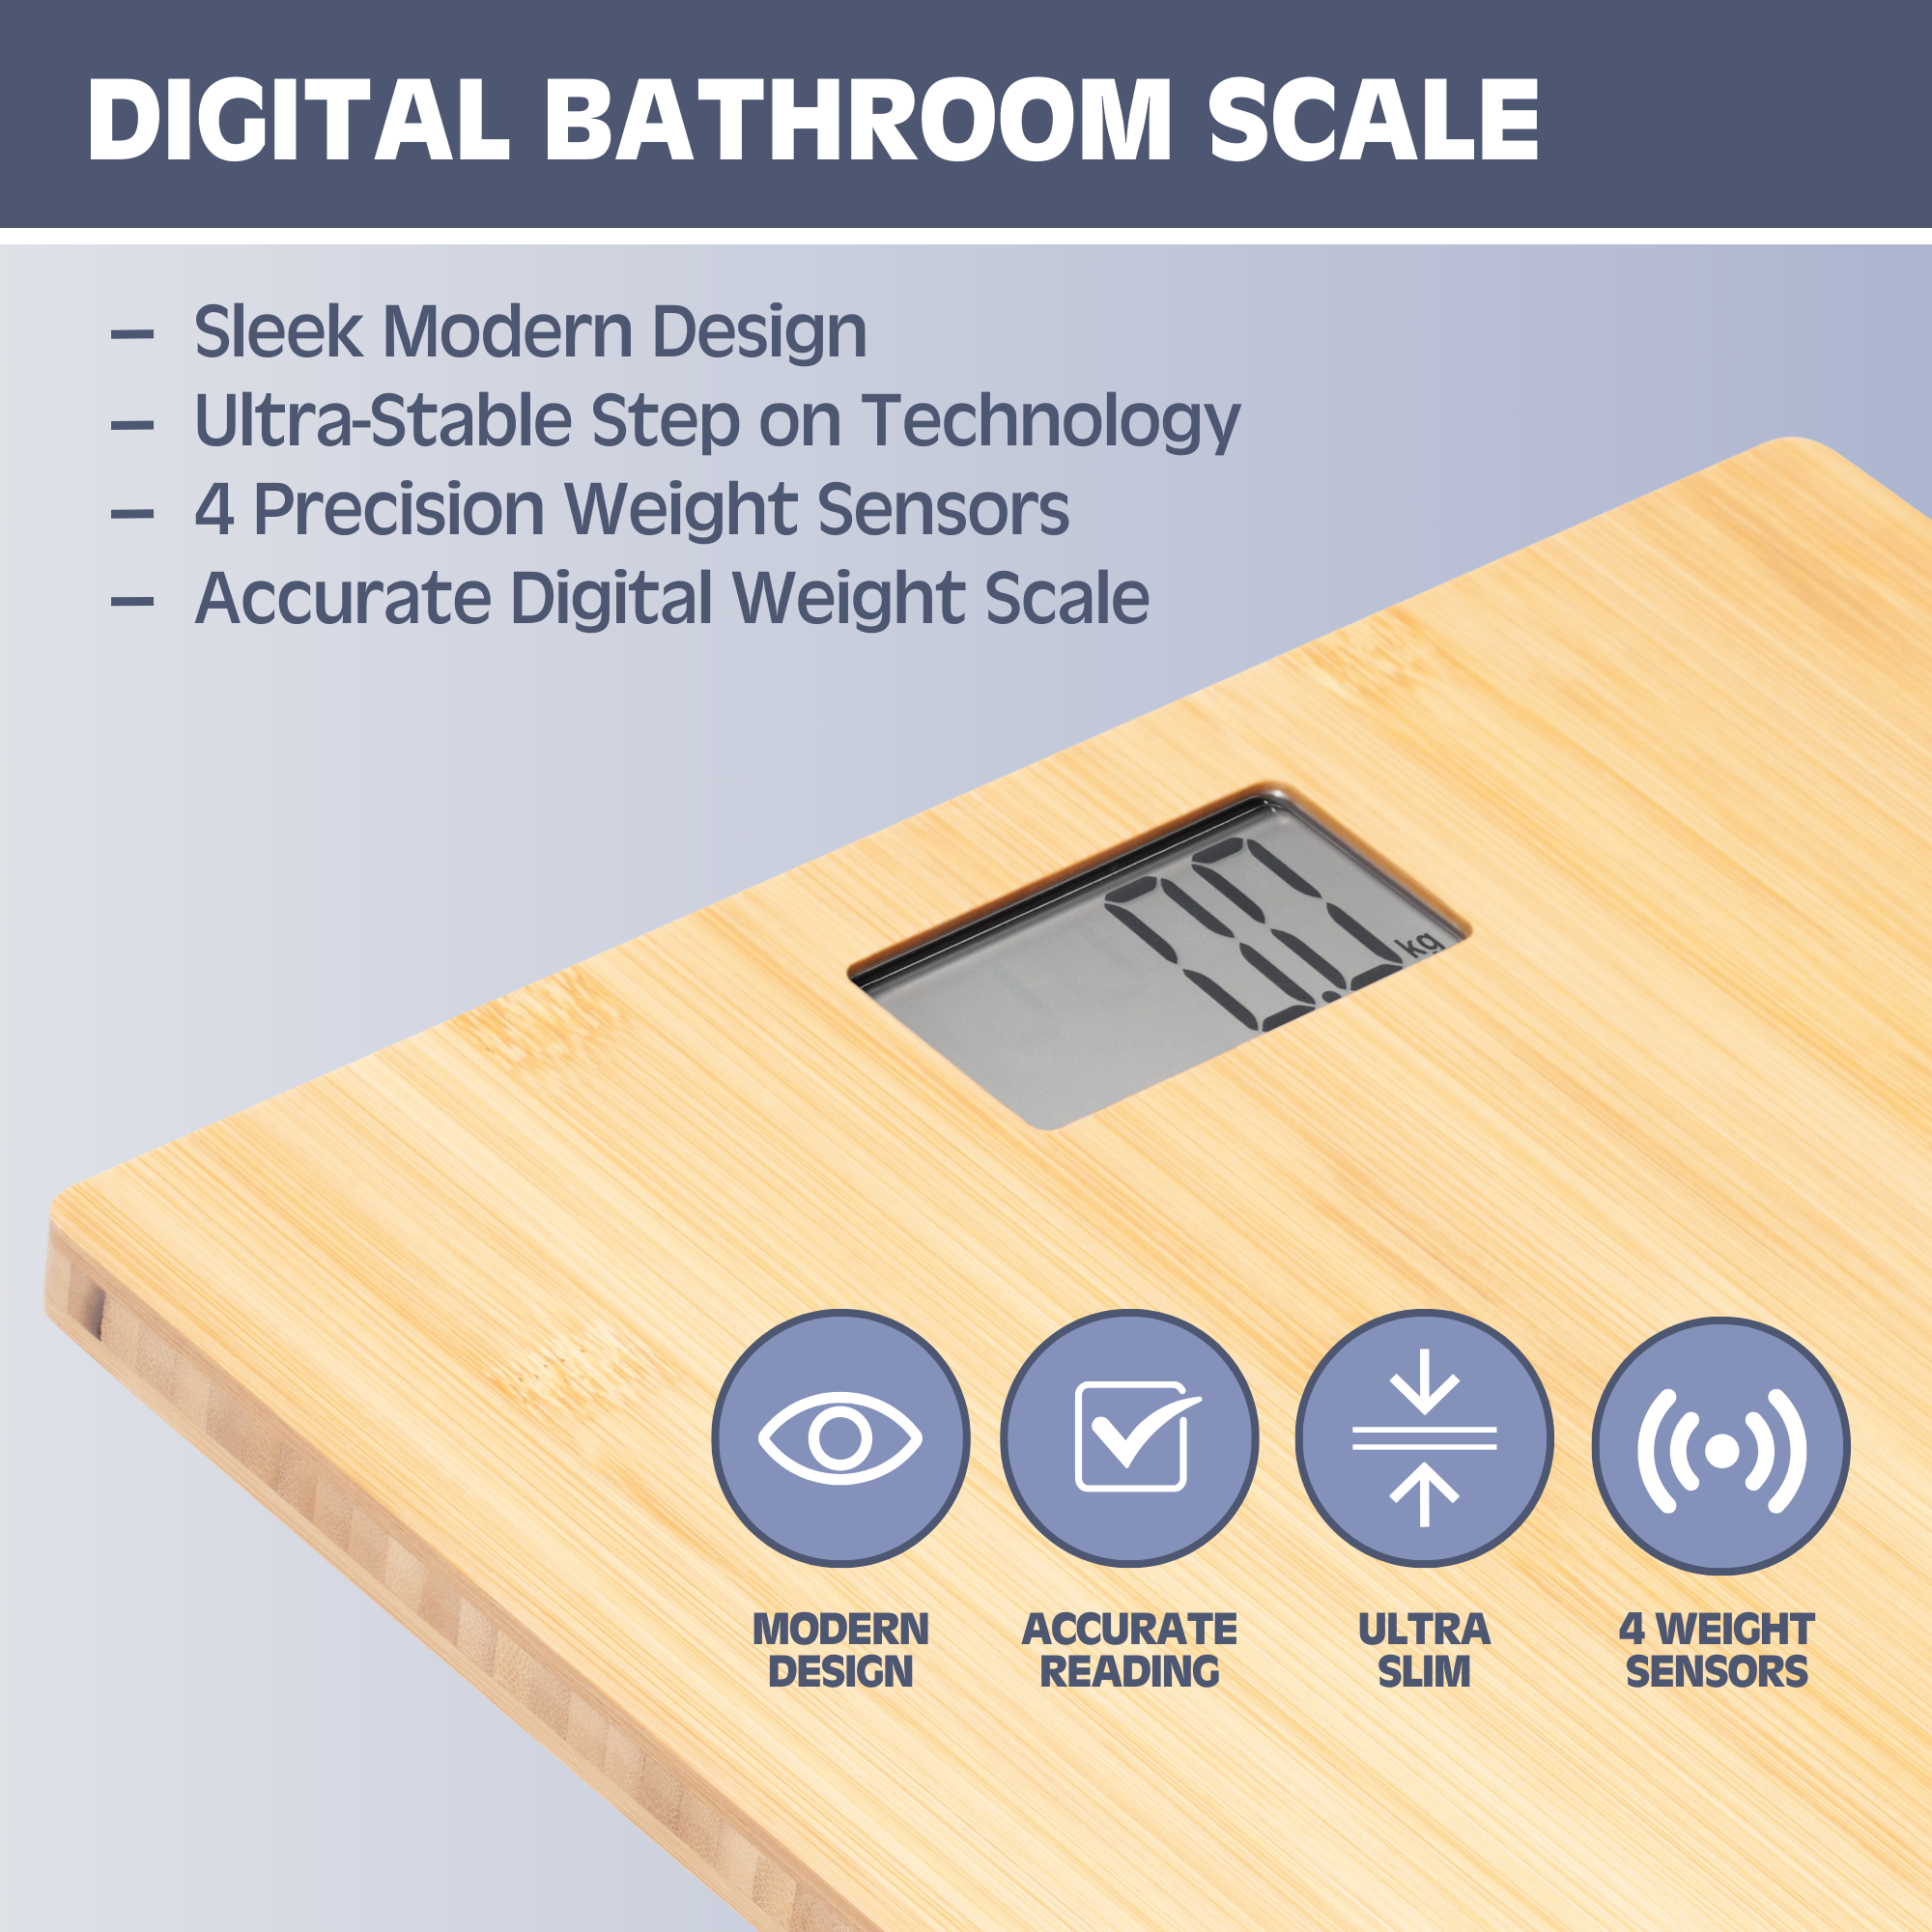  Poplar Home Products Digital Bathroom Scales for